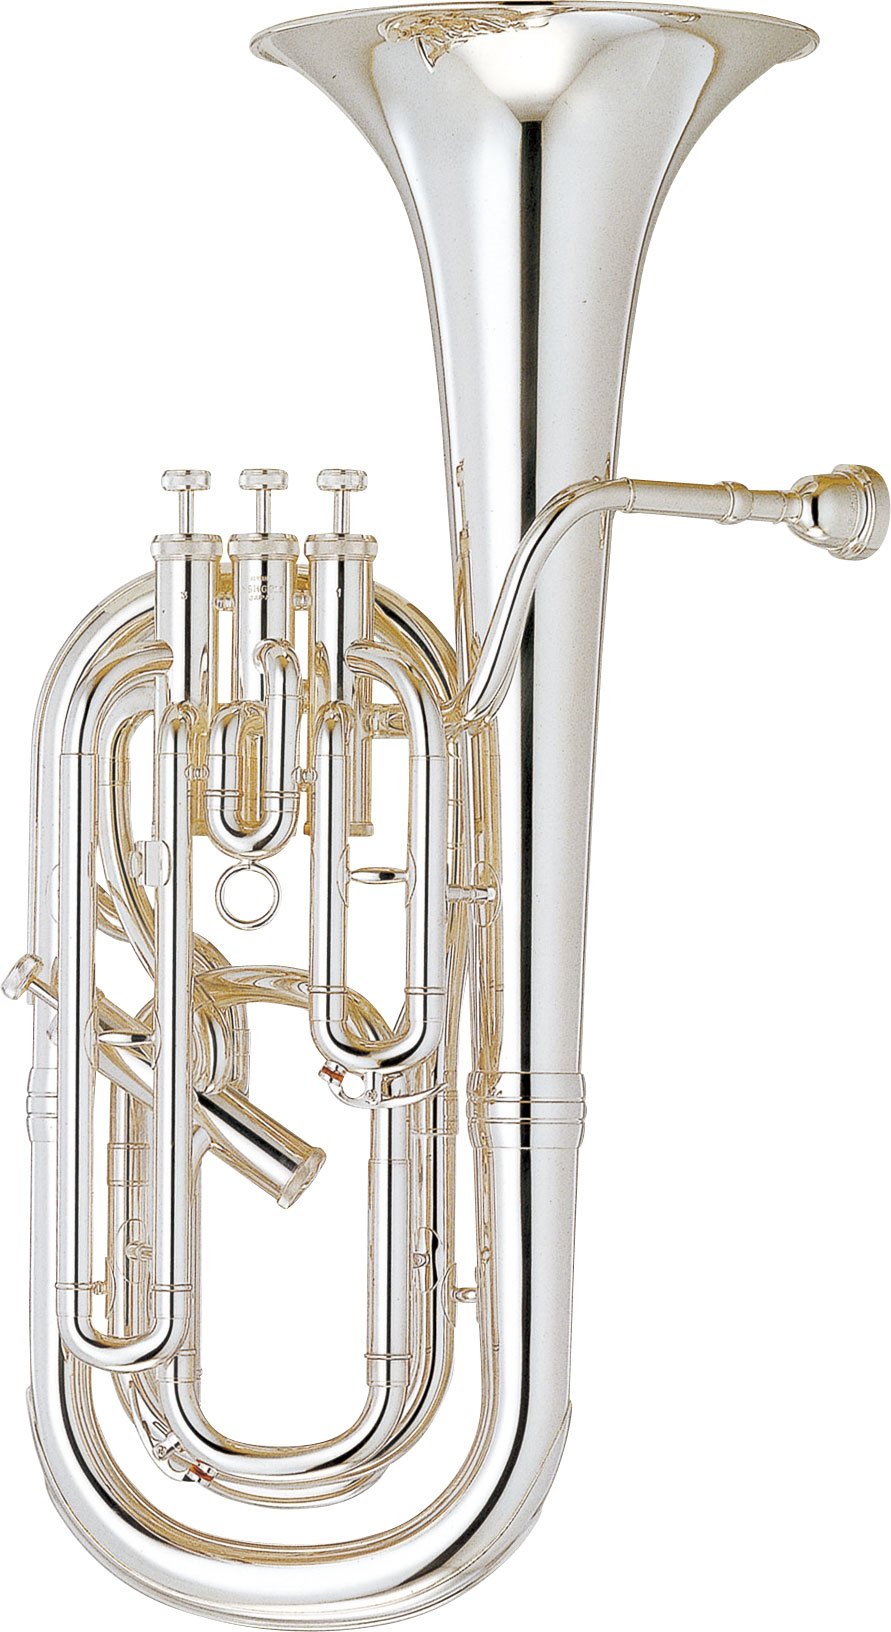 YBH-621S - Overview - Baritones - Brass & Woodwinds - Musical 